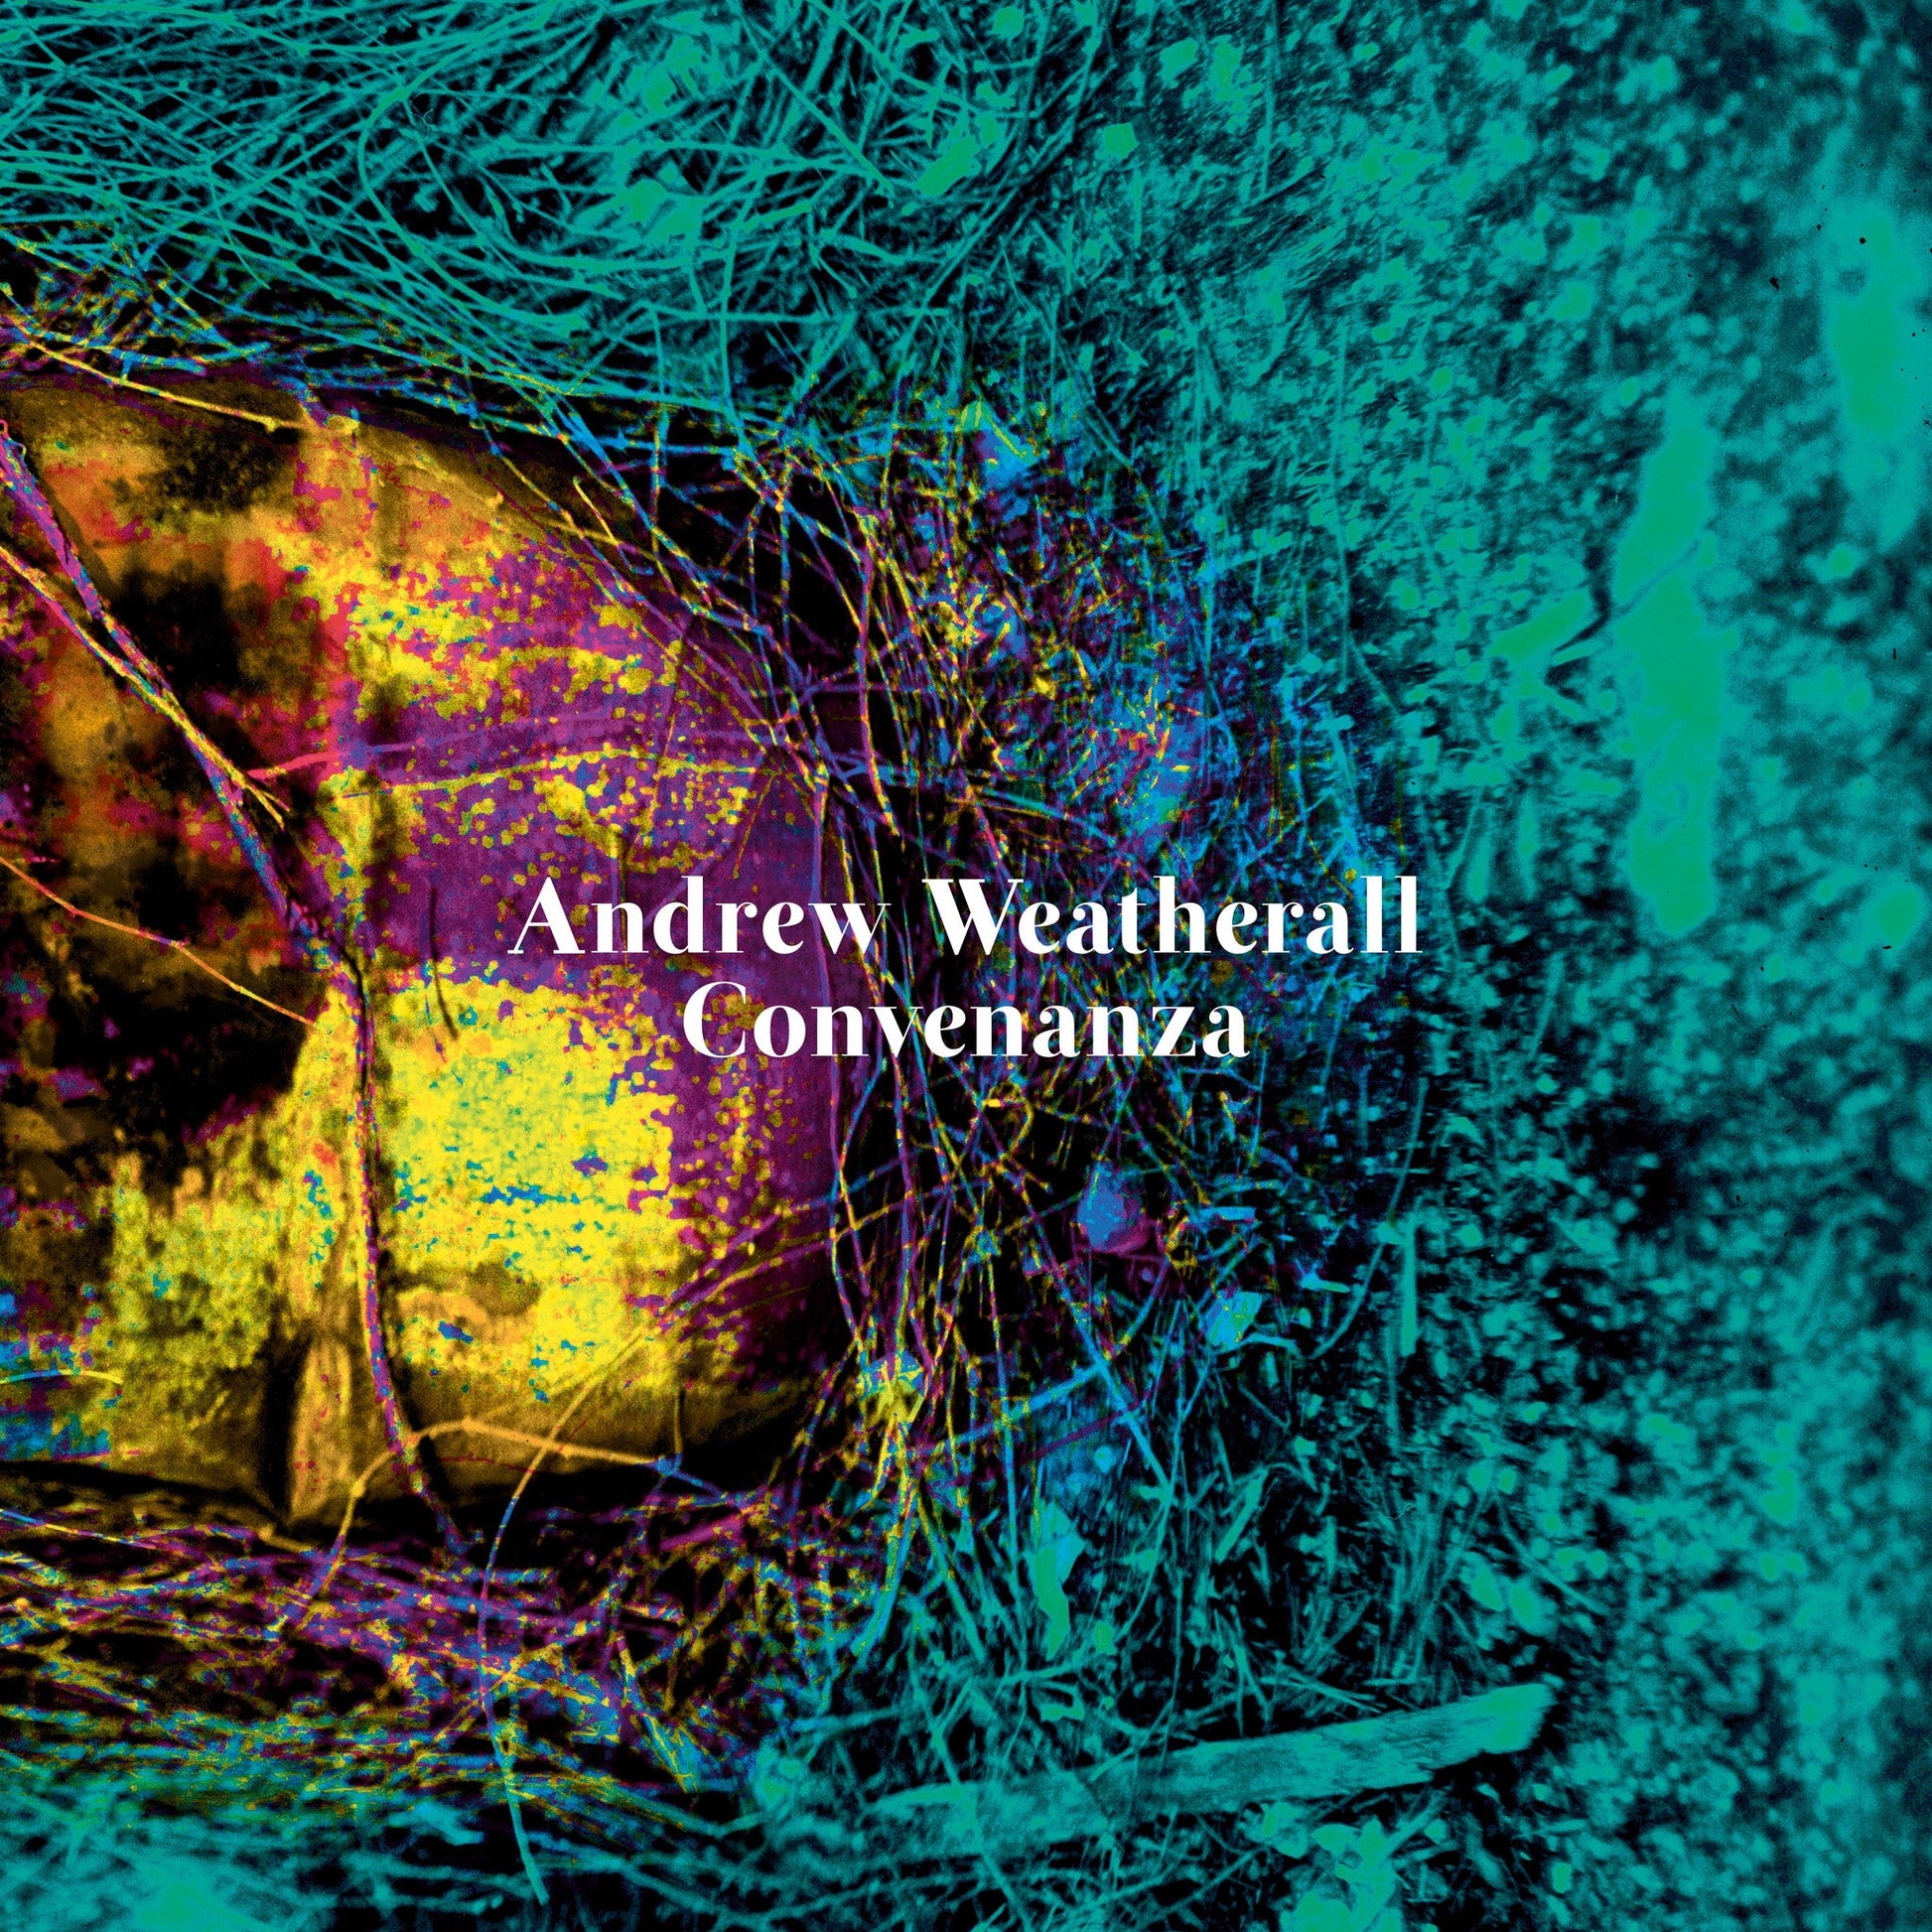 Andrew Weatherall “Convenanza” LP / CD